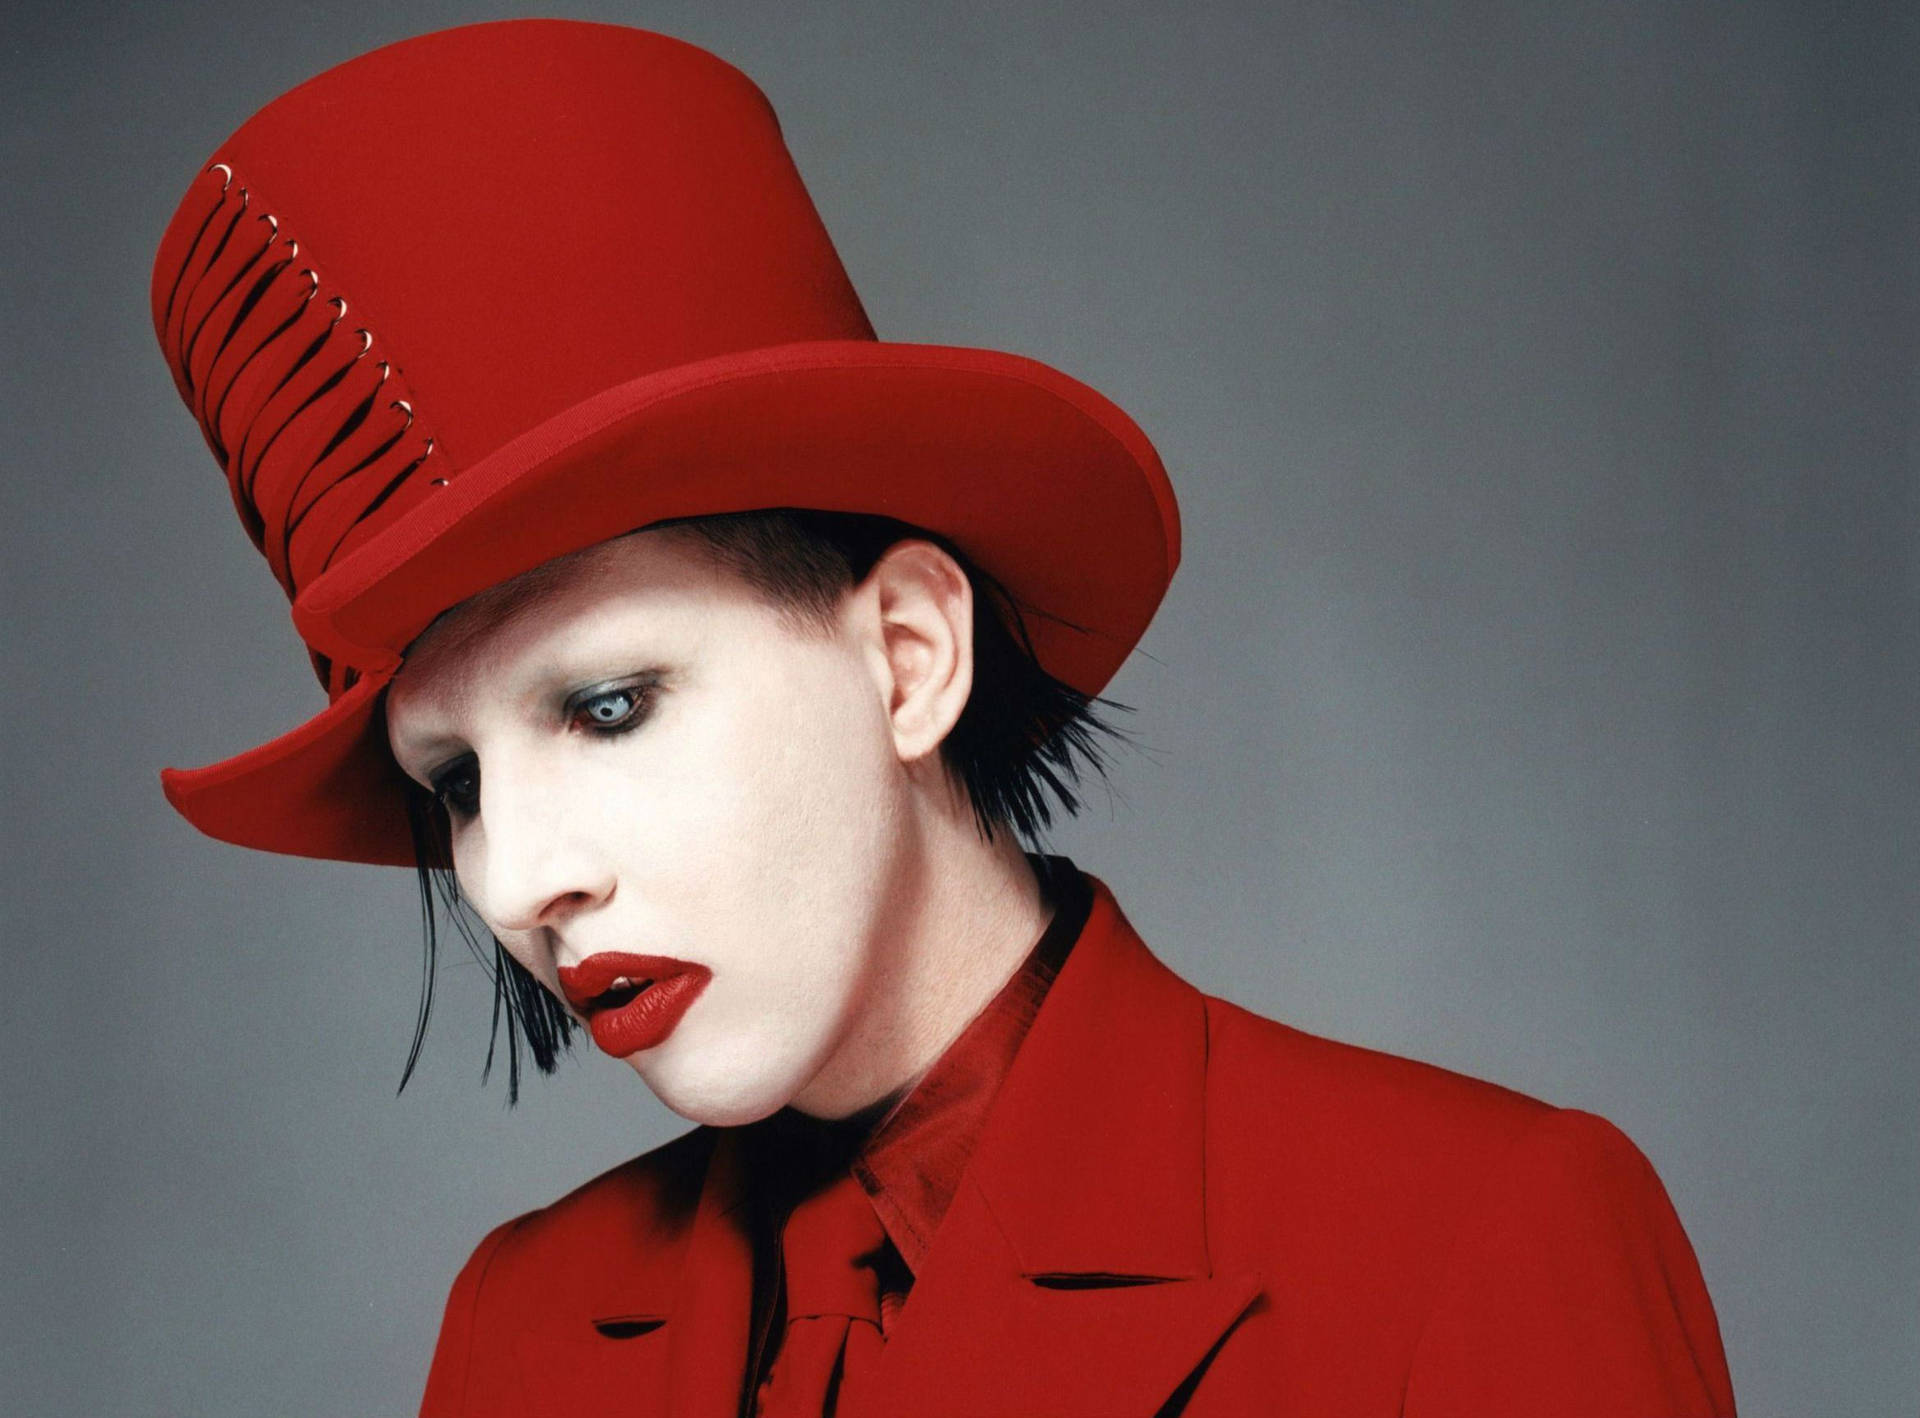 Marilyn Manson At The Grammys